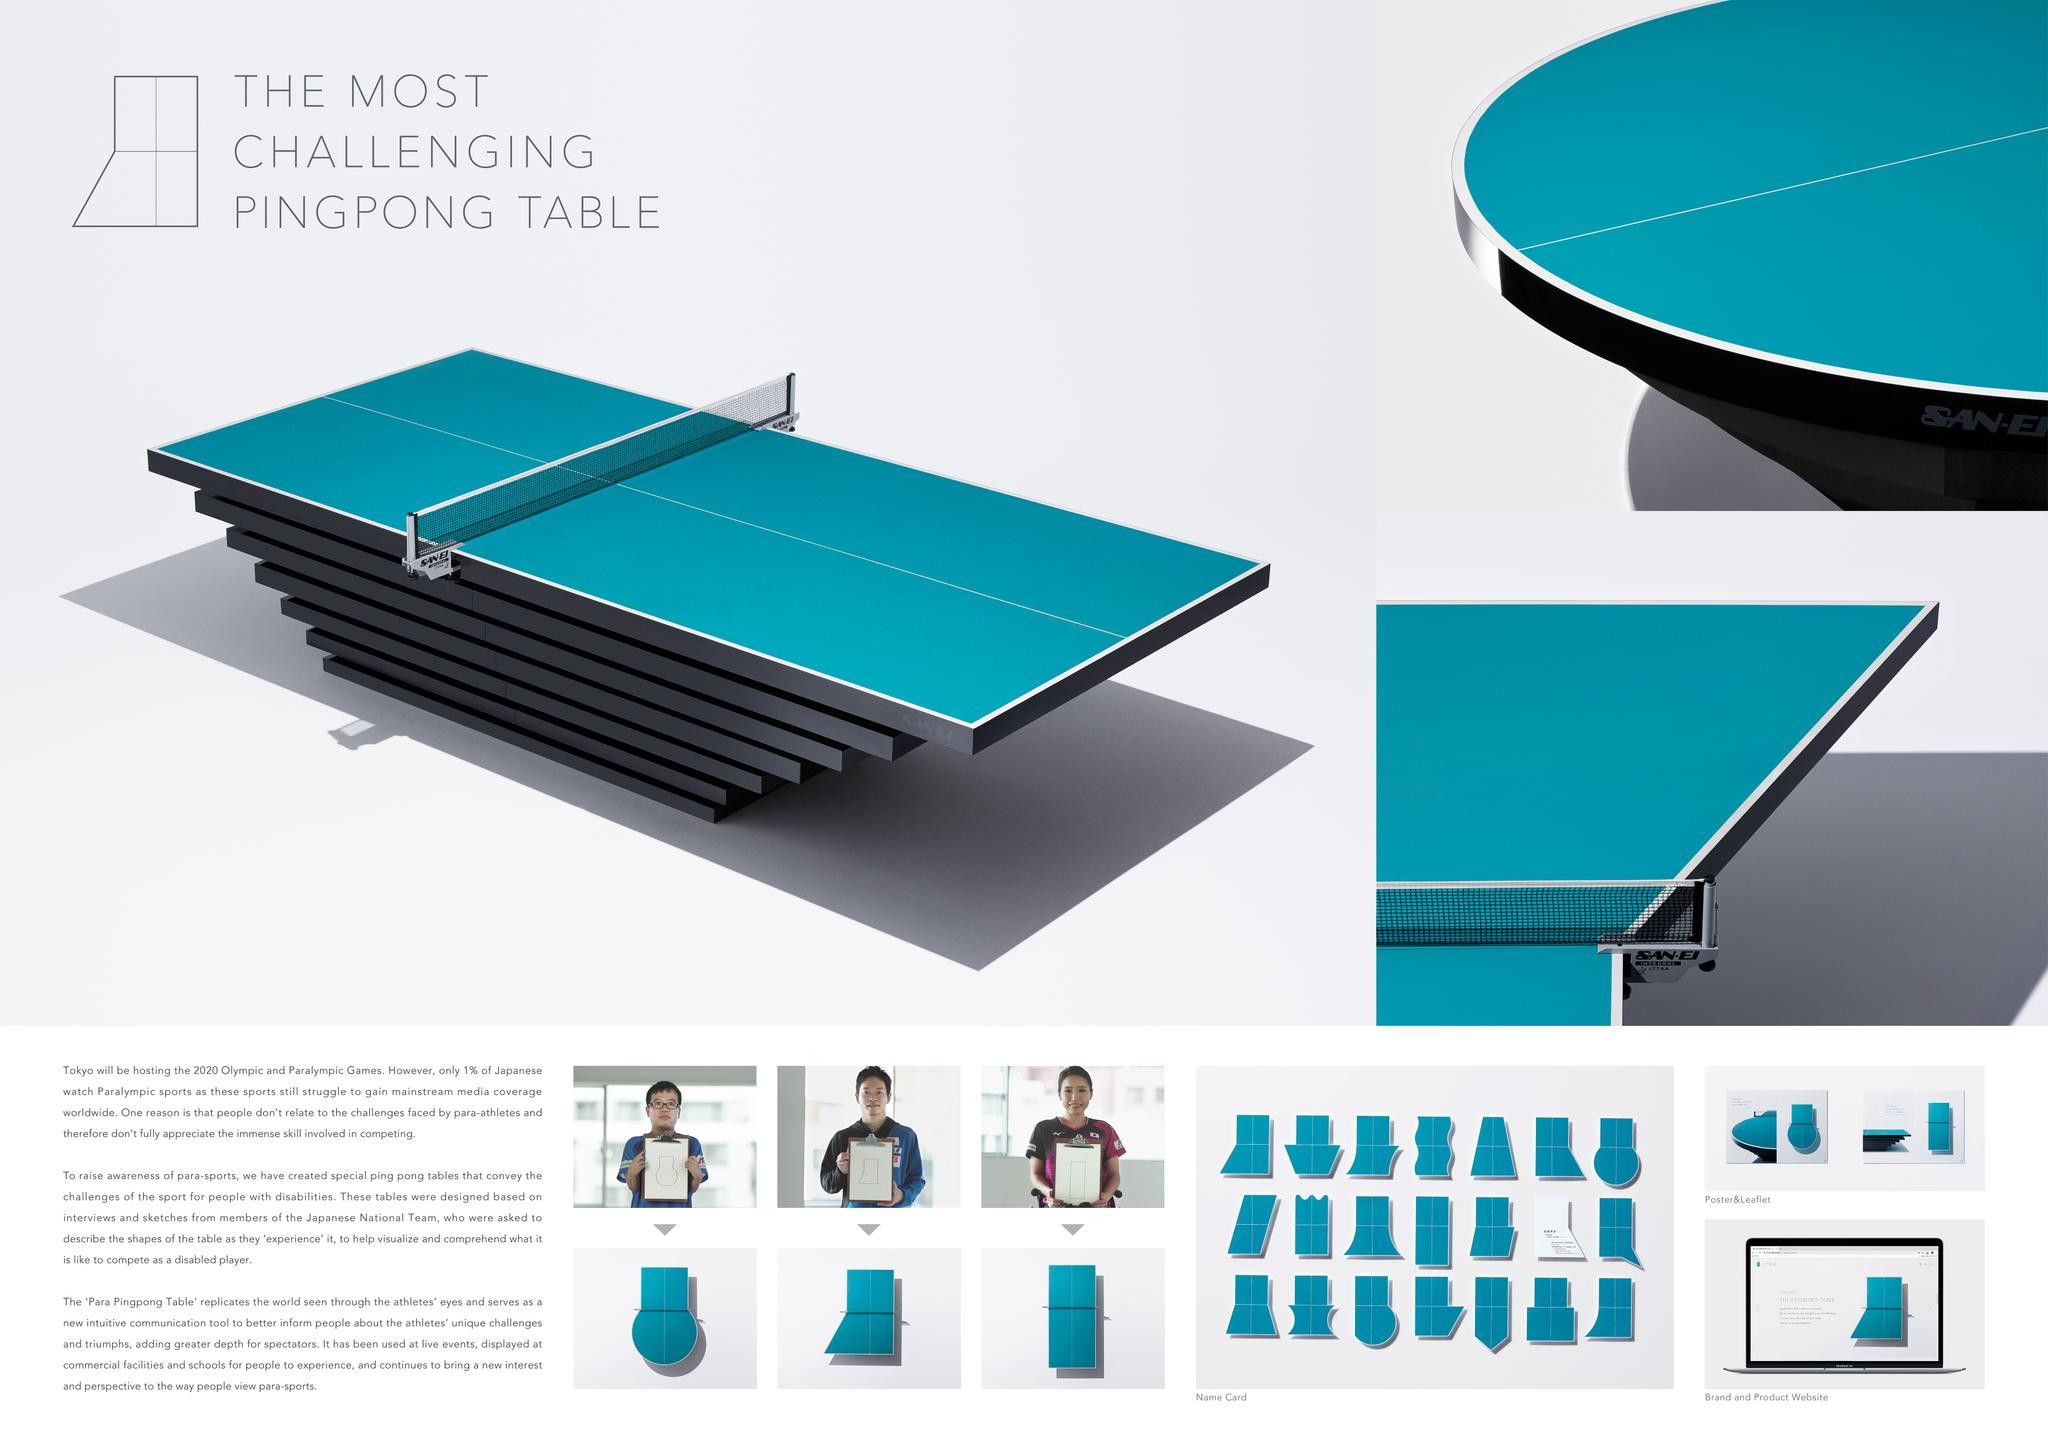 The Most Challenging Pingpong Table